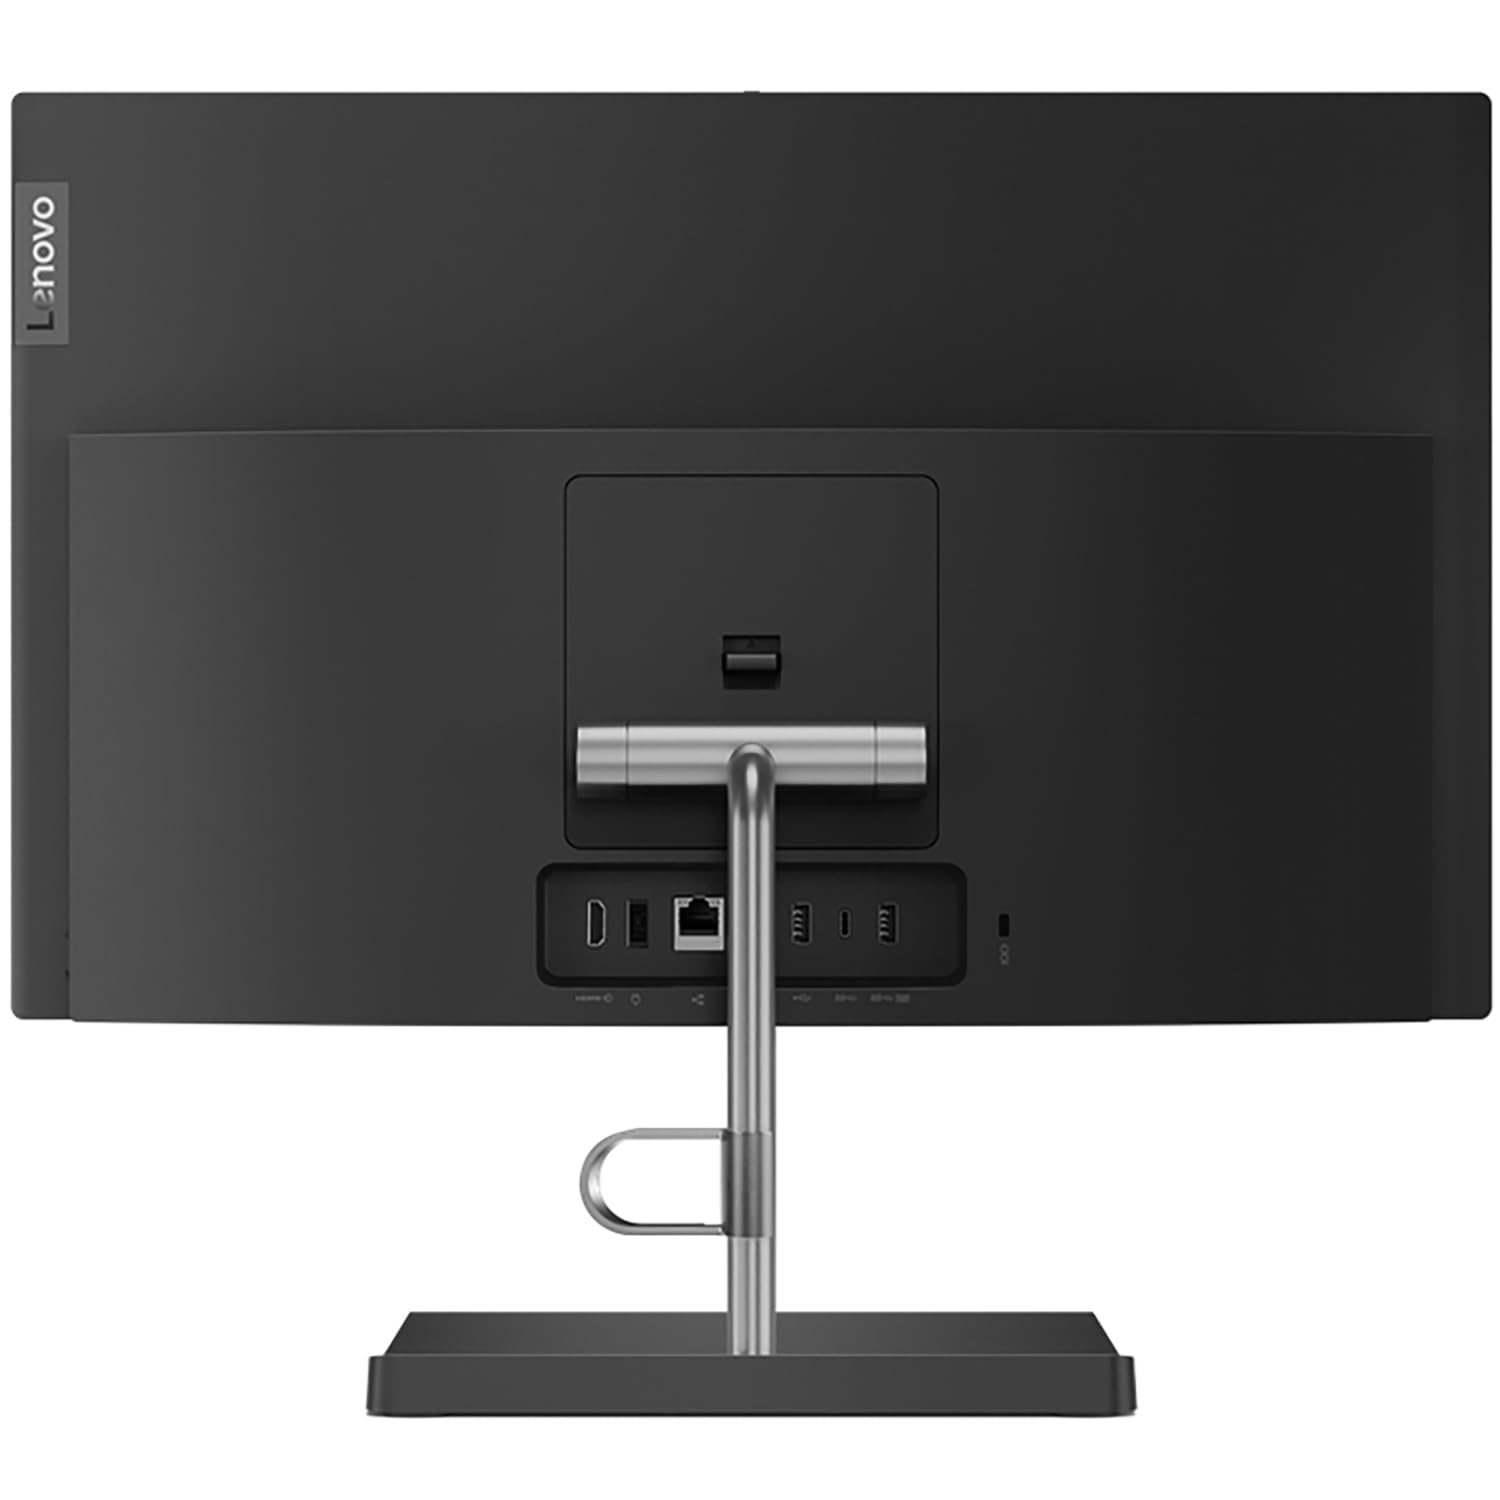 Lenovo V50a 24 AIO 23.8" FHD Business All-in-One Desktop Computer, Intel Core i3-10100T (Beat i5-8300H), 16GB DDR4 RAM, 512GB PCIe SSD, DVDRW, WiFi, Bluetooth 5.0, Keyboard and Mouse, Windows 11 Pro